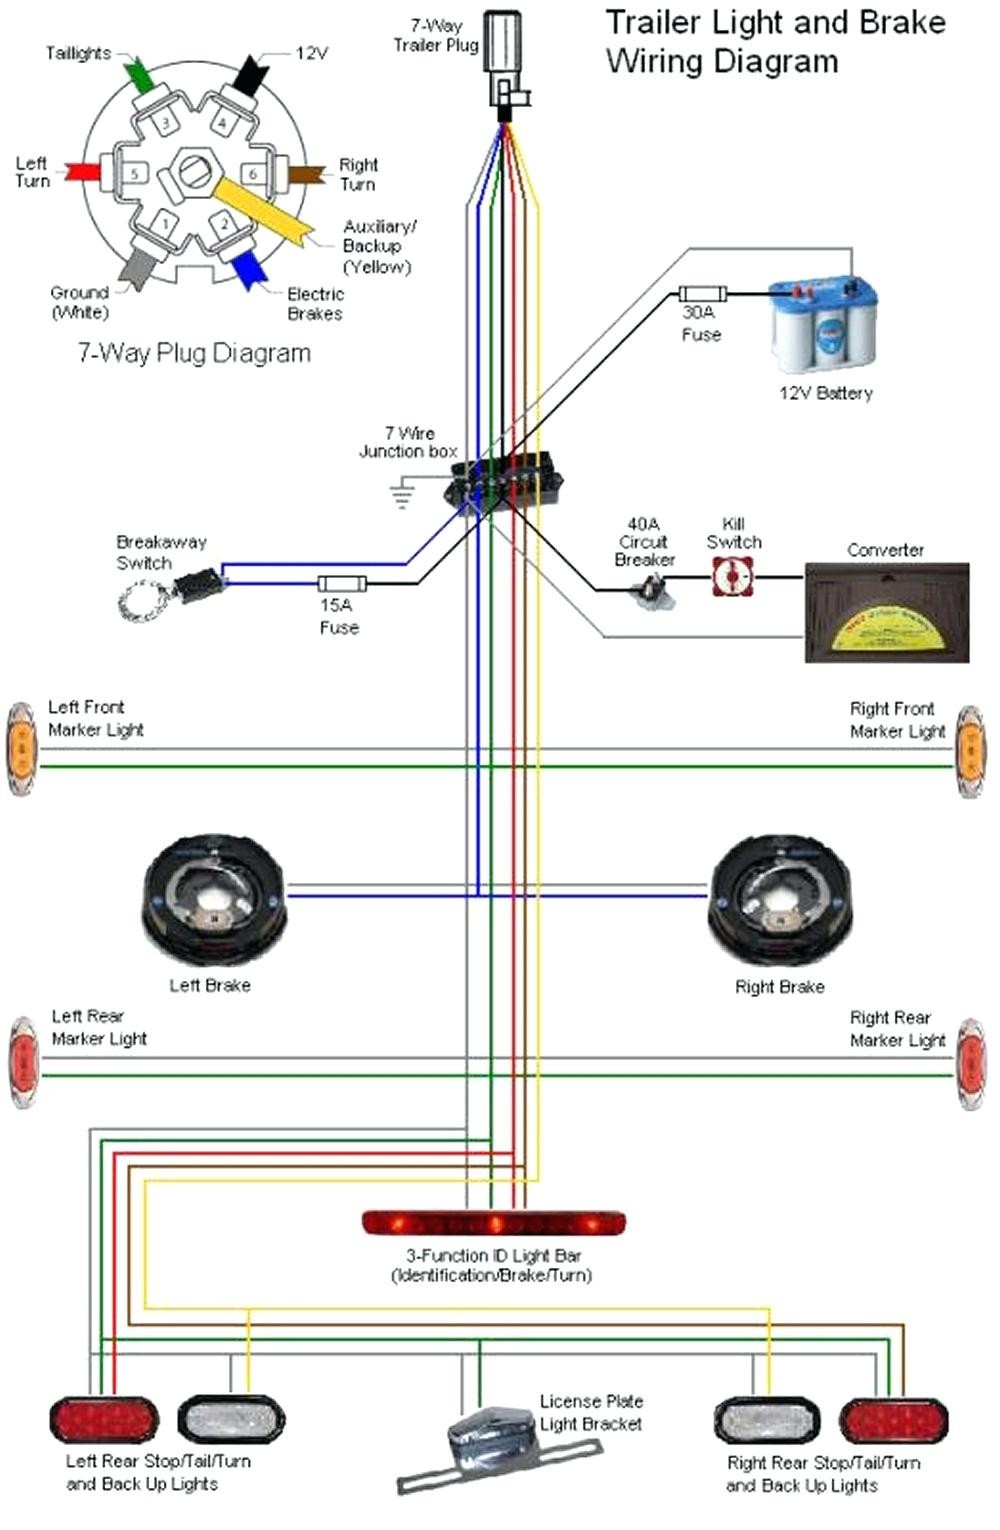 5 Pin Flat Trailer Wiring Diagram Best 7 Wire For With Way 9